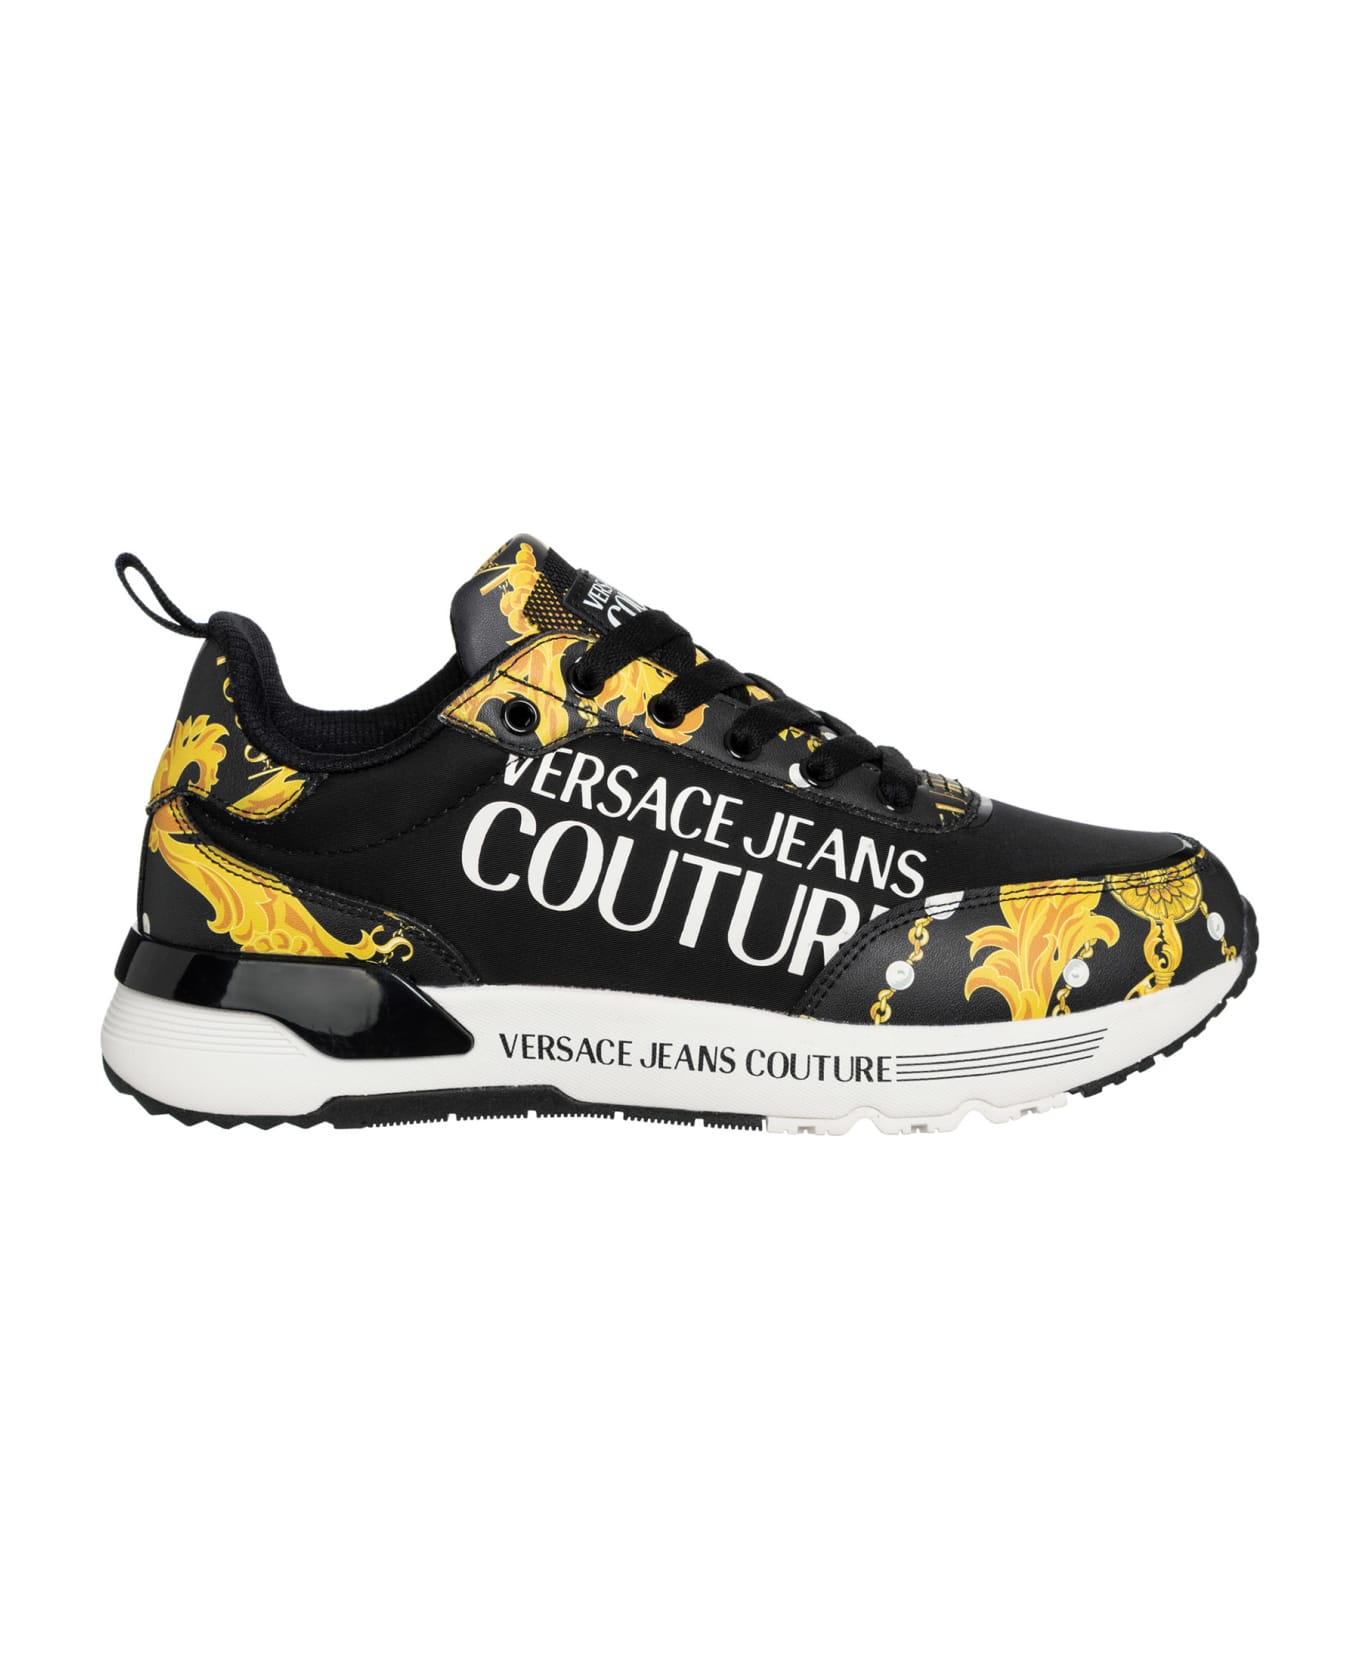 Versace Jeans Couture Dynamic Chain Couture Leather Sneakers - BLACK/GOLD